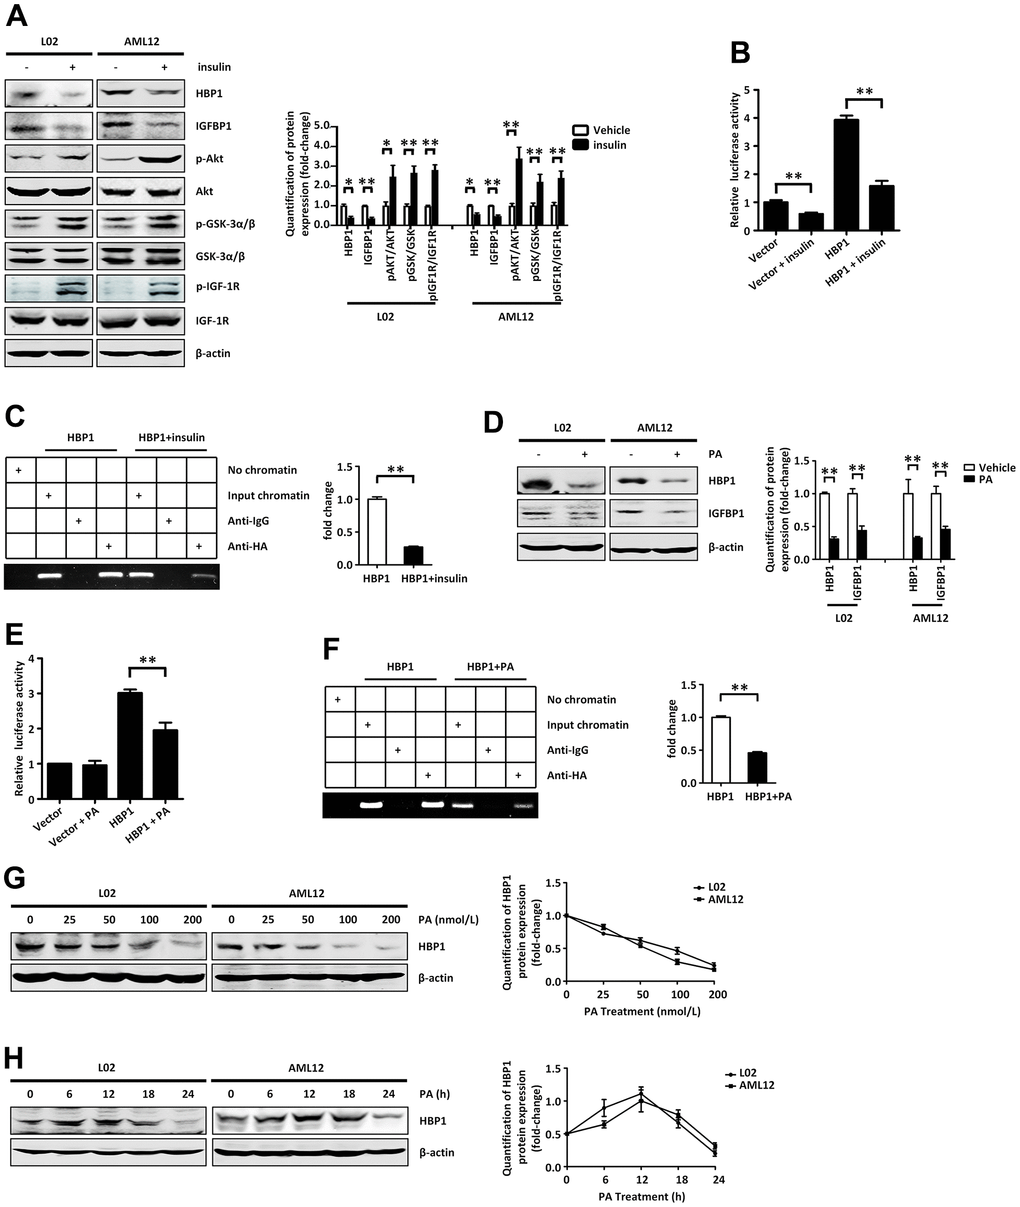 Insulin and palmitic acid suppress the protein expression of HBP1 and the combination of HBP1 and IGFBP1 promoter. (A) Insulin activates p-AKT signaling pathway and inhibits protein expression of HBP1 and IGFBP1. The protein levels of HBP1, IGFBP1, p-AKT, p-GSK-3α/β, p-IGF-1R, AKT, GSK-3α/β and IGF-1R were measured by western blotting in L02 and AML12 cells. β-actin was used as a loading control. Quantification was normalized to β-actin. (B) Insulin can attenuate both the IGFBP1 promoter activity and the activation effect of HBP1 on IGFBP1 promoter. 293T cells were co-transfected with the IGFBP1 promoter and HA-HBP1 plasmid and were treated with or without insulin. Luciferase activities were determined 24 hours after transfection and were analyzed from four separate experiments. (C) Insulin inhibits the binding ability of HBP1 and IGFBP1 promoter. ChIP assays were carried out to verify the binding of exogenous HBP1 to the endogenous IGFBP1. 293T cells transfected with HA-HBP1 were treated with or without insulin. The region of IGFBP1 promoter contains the HBP1 affinity site and was analyzed by specific PCR. Anti-HA antibody was used in the indicated lanes. Lanes were quantitated by Image J software. (D) Palmitic acid inhibits protein expression of HBP1 and IGFBP1. The protein levels of HBP1 and IGFBP1 were measured by western blotting in L02 and AML12 cells. β-actin was used as a loading control. Quantification of HBP1 and IGFBP1 protein expression was normalized to β-actin. (E) Palmitic acid weaken the luciferase activities of HBP1 on IGFBP1 promoter. 293T cells were co-transfected with the IGFBP1 promoter and HA-HBP1 plasmid and were treated with or without palmitic acid. Luciferase activity was determined 24 hours after transfection and analyzed from four separate experiments. (F) Palmitic acid restrains the binding ability of HBP1 and IGFBP1 promoter. ChIP assays were performed to verify the binding of exogenous HBP1 to the endogenous IGFBP1 gene. 293T cells transfected with HA-HBP1 were treated with or without palmitic acid. The region of IGFBP1 promoter contains the HBP1 affinity site and was analyzed by specific PCR. Anti-HA antibody was used in the indicated lanes. Lanes were quantitated by Image J software. (G) The protein level of HBP1 decreases gradually with the increasing of PA dose. The protein levels of HBP1 were measured by western blotting in L02 and AML12 cells. β-actin was used as a loading control. Quantification was normalized to β-actin. (H) With the increase of PA duration, the protein level of HBP1 firstly increased and then decreased significantly. The protein levels of HBP1 were measured by western blotting in L02 and AML12 cells. β-actin was used as a loading control. Quantification was normalized to β-actin. Data were the mean ± SD by a two-tail, unpaired Student’s t-test. *, p